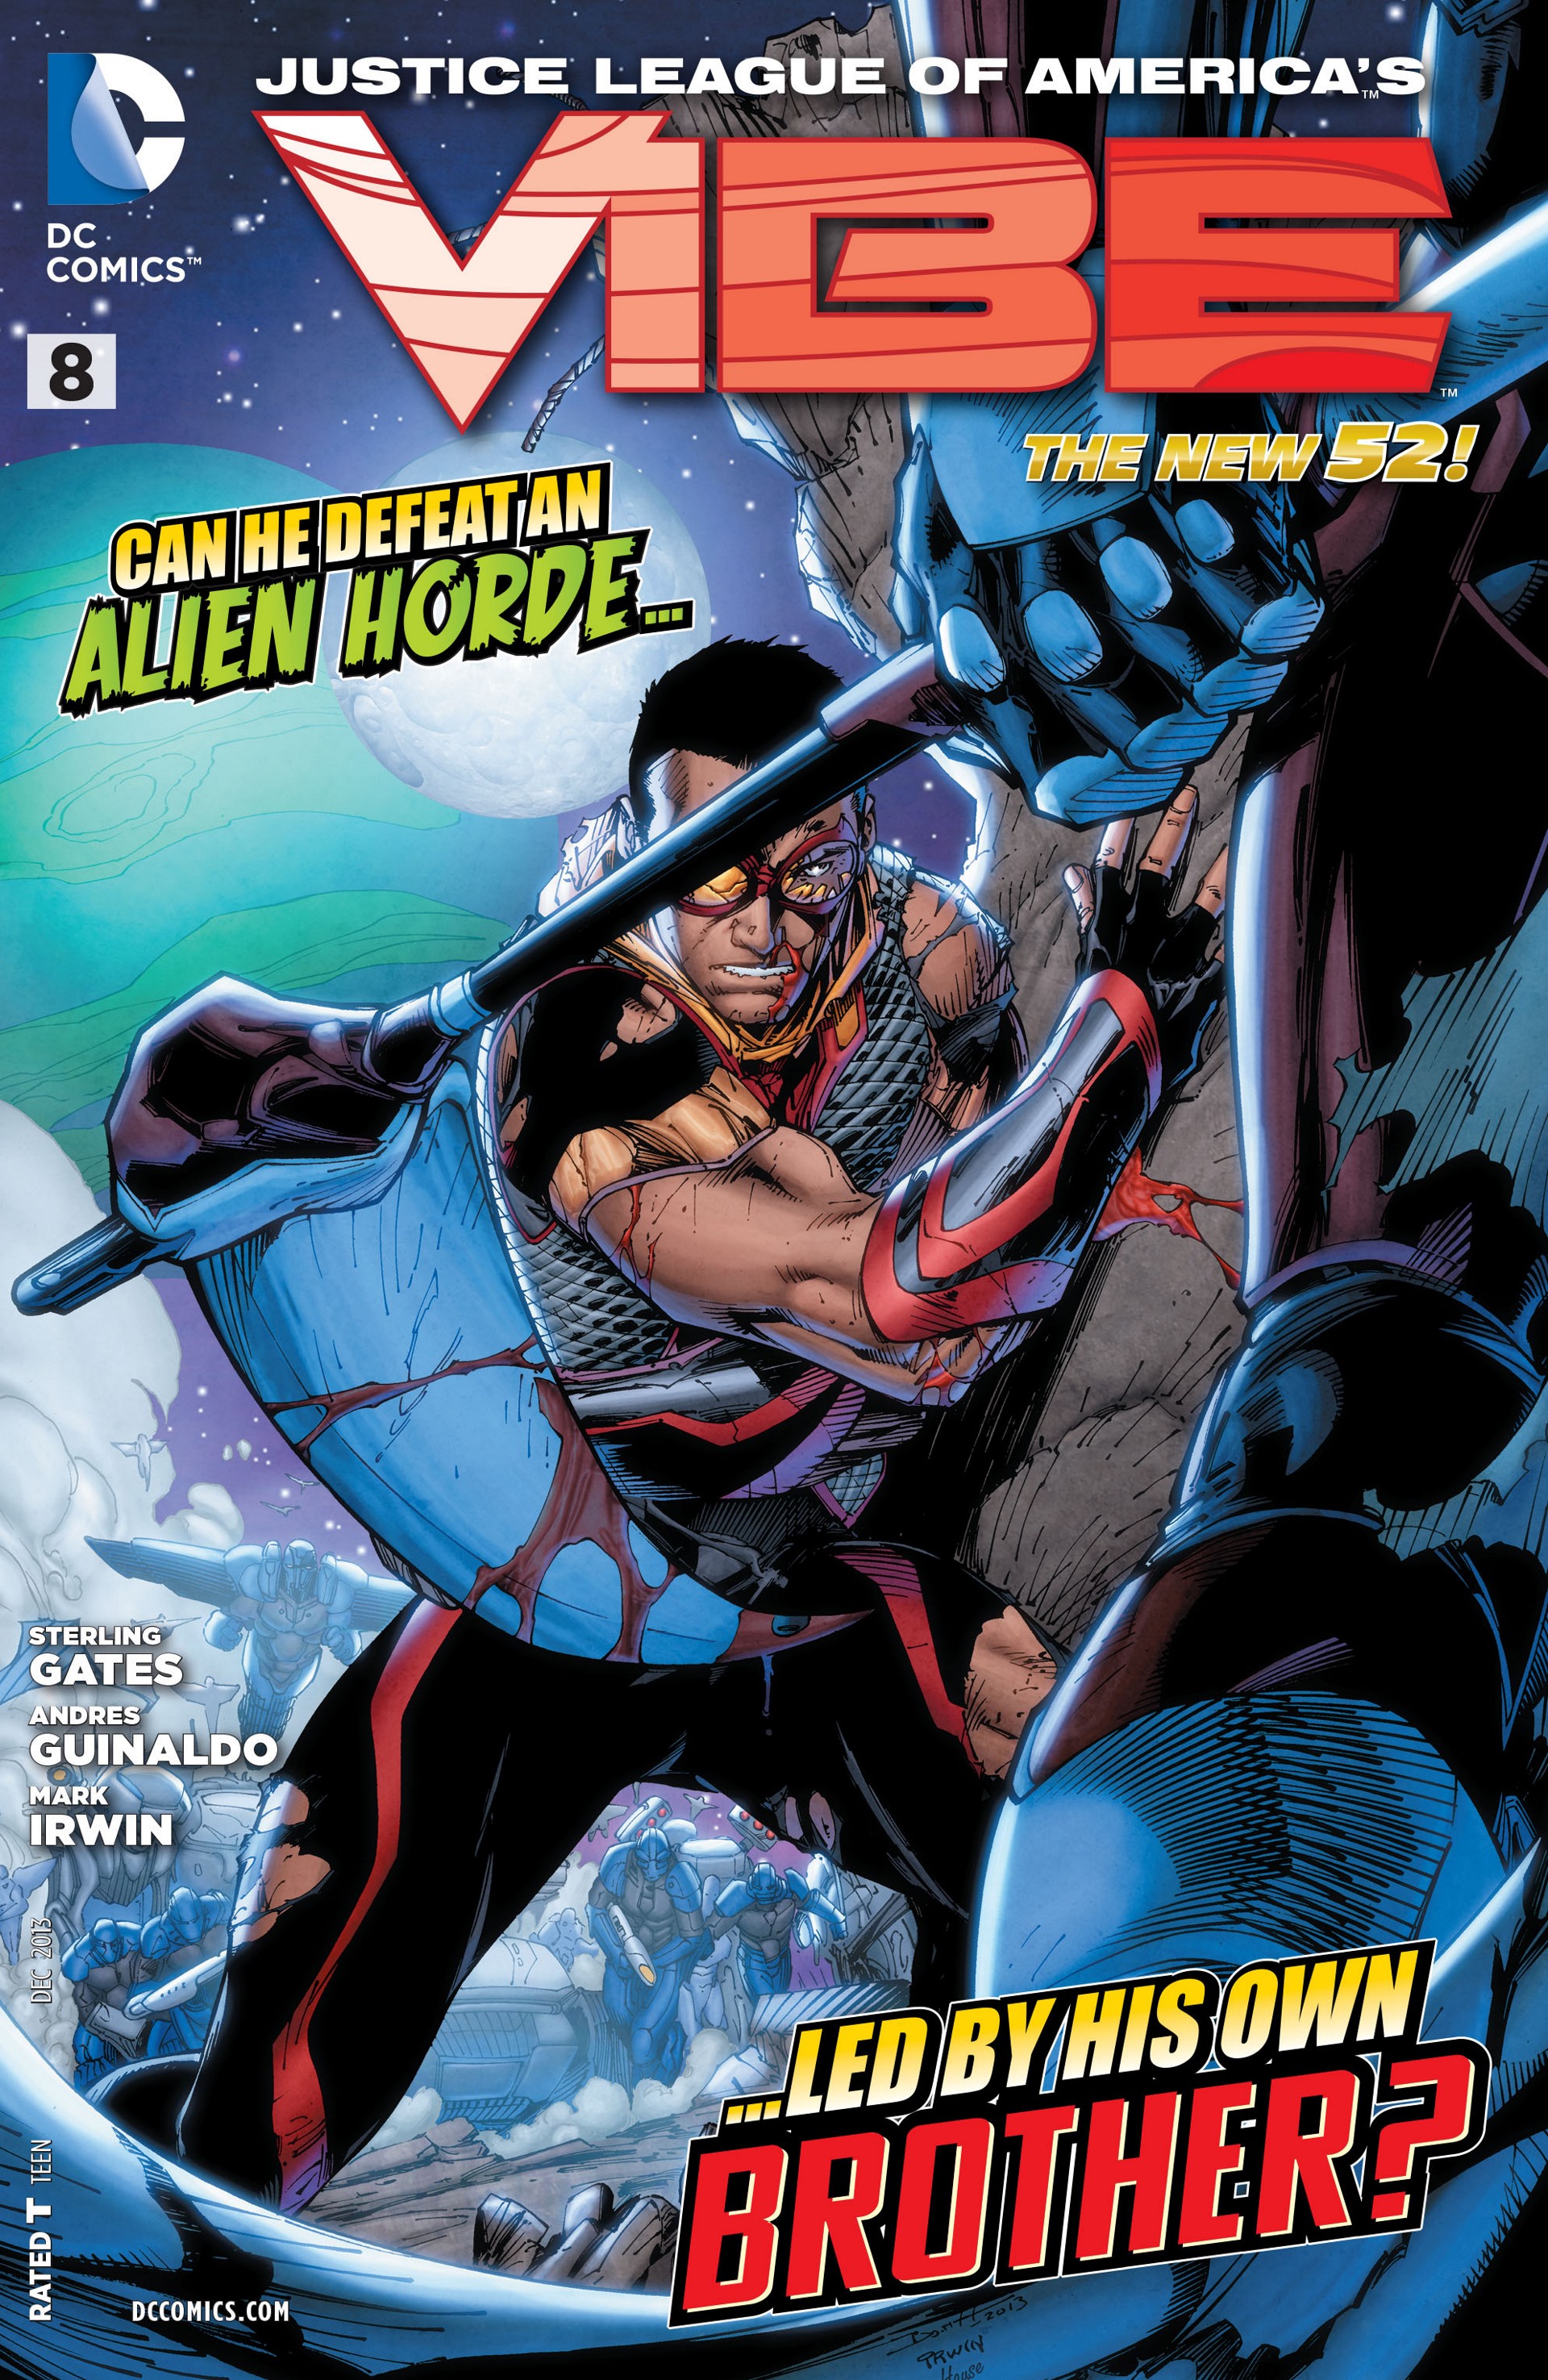 Read online Justice League of America's Vibe comic -  Issue #8 - 1